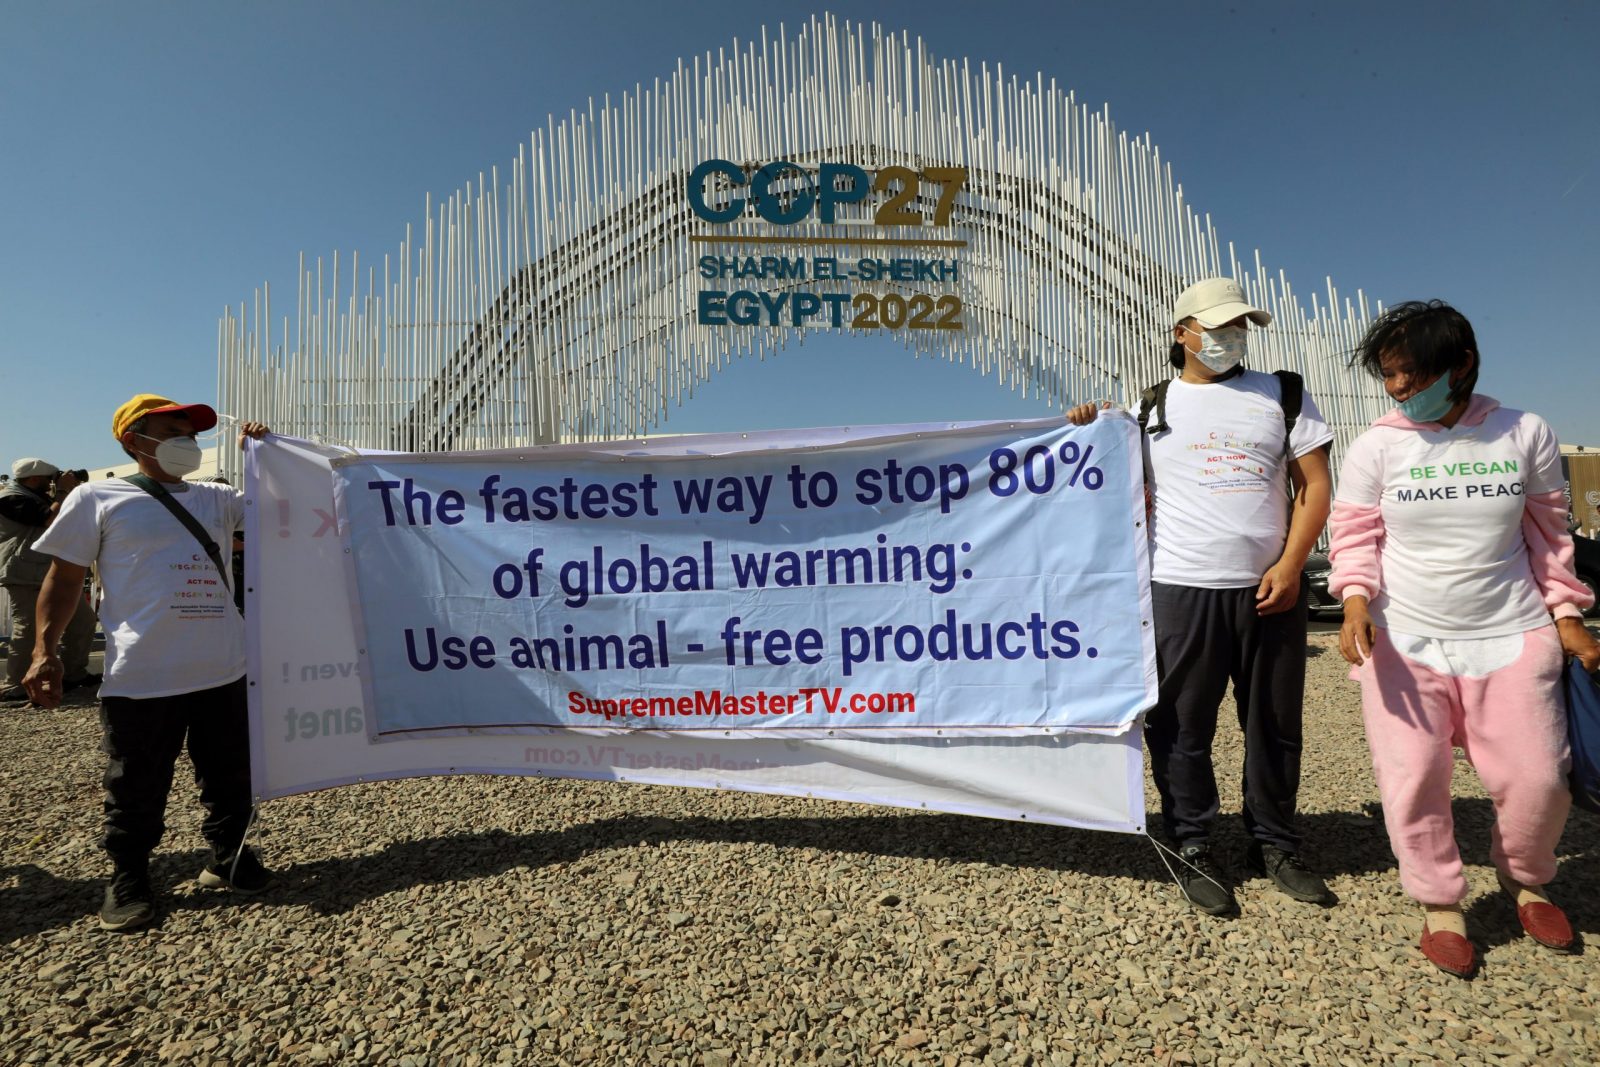 epa10289801 Activists hold banners as they demonstrate at the entrance of the Sharm El Sheikh International Convention Centre, during the COP27 climate summit opening, in Sharm el-Sheikh, Egypt, 06 November 2022. The 2022 United Nations Climate Change Conference (COP27), running from 06 till 18 November in Sharm El-Sheikh, is expected to host one of the largest number of participants in the annual global climate conference of over 40,000 estimated attendees including heads of states and governments, civil society, media and other relevant stakeholders. The events will include Climate Implementation Summit, thematic days, flagship initiatives, and Green Zone activities engaging with climate and other global challenges.  EPA/KHALED ELFIQI